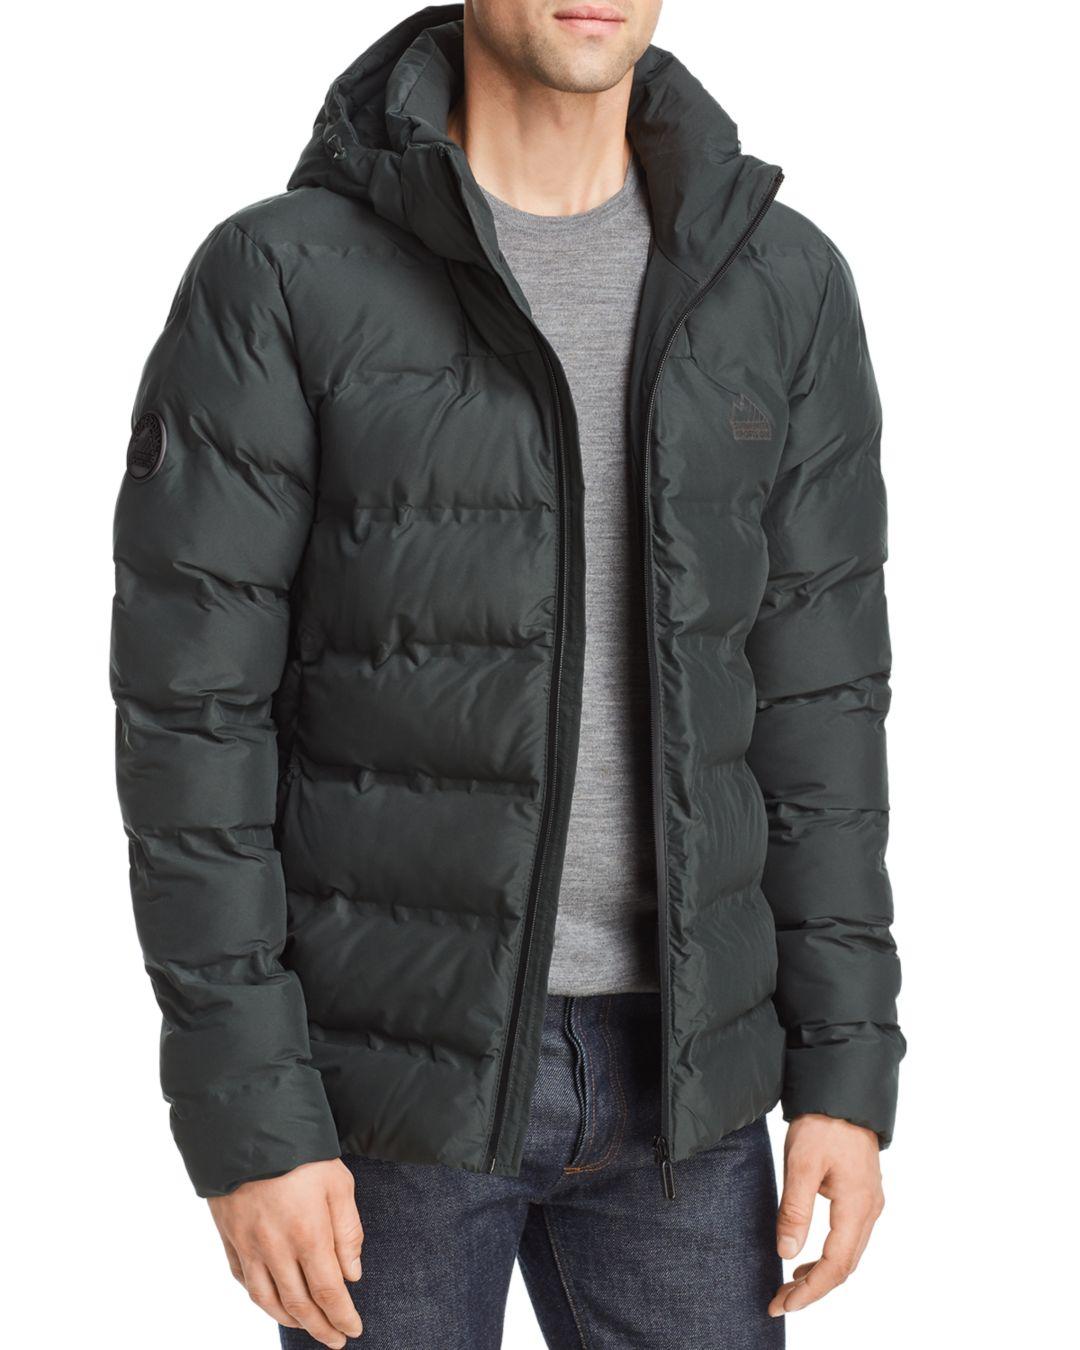 Superdry Echo Quilted Puffer Jacket in Deep Forest (Black) for Men - Lyst